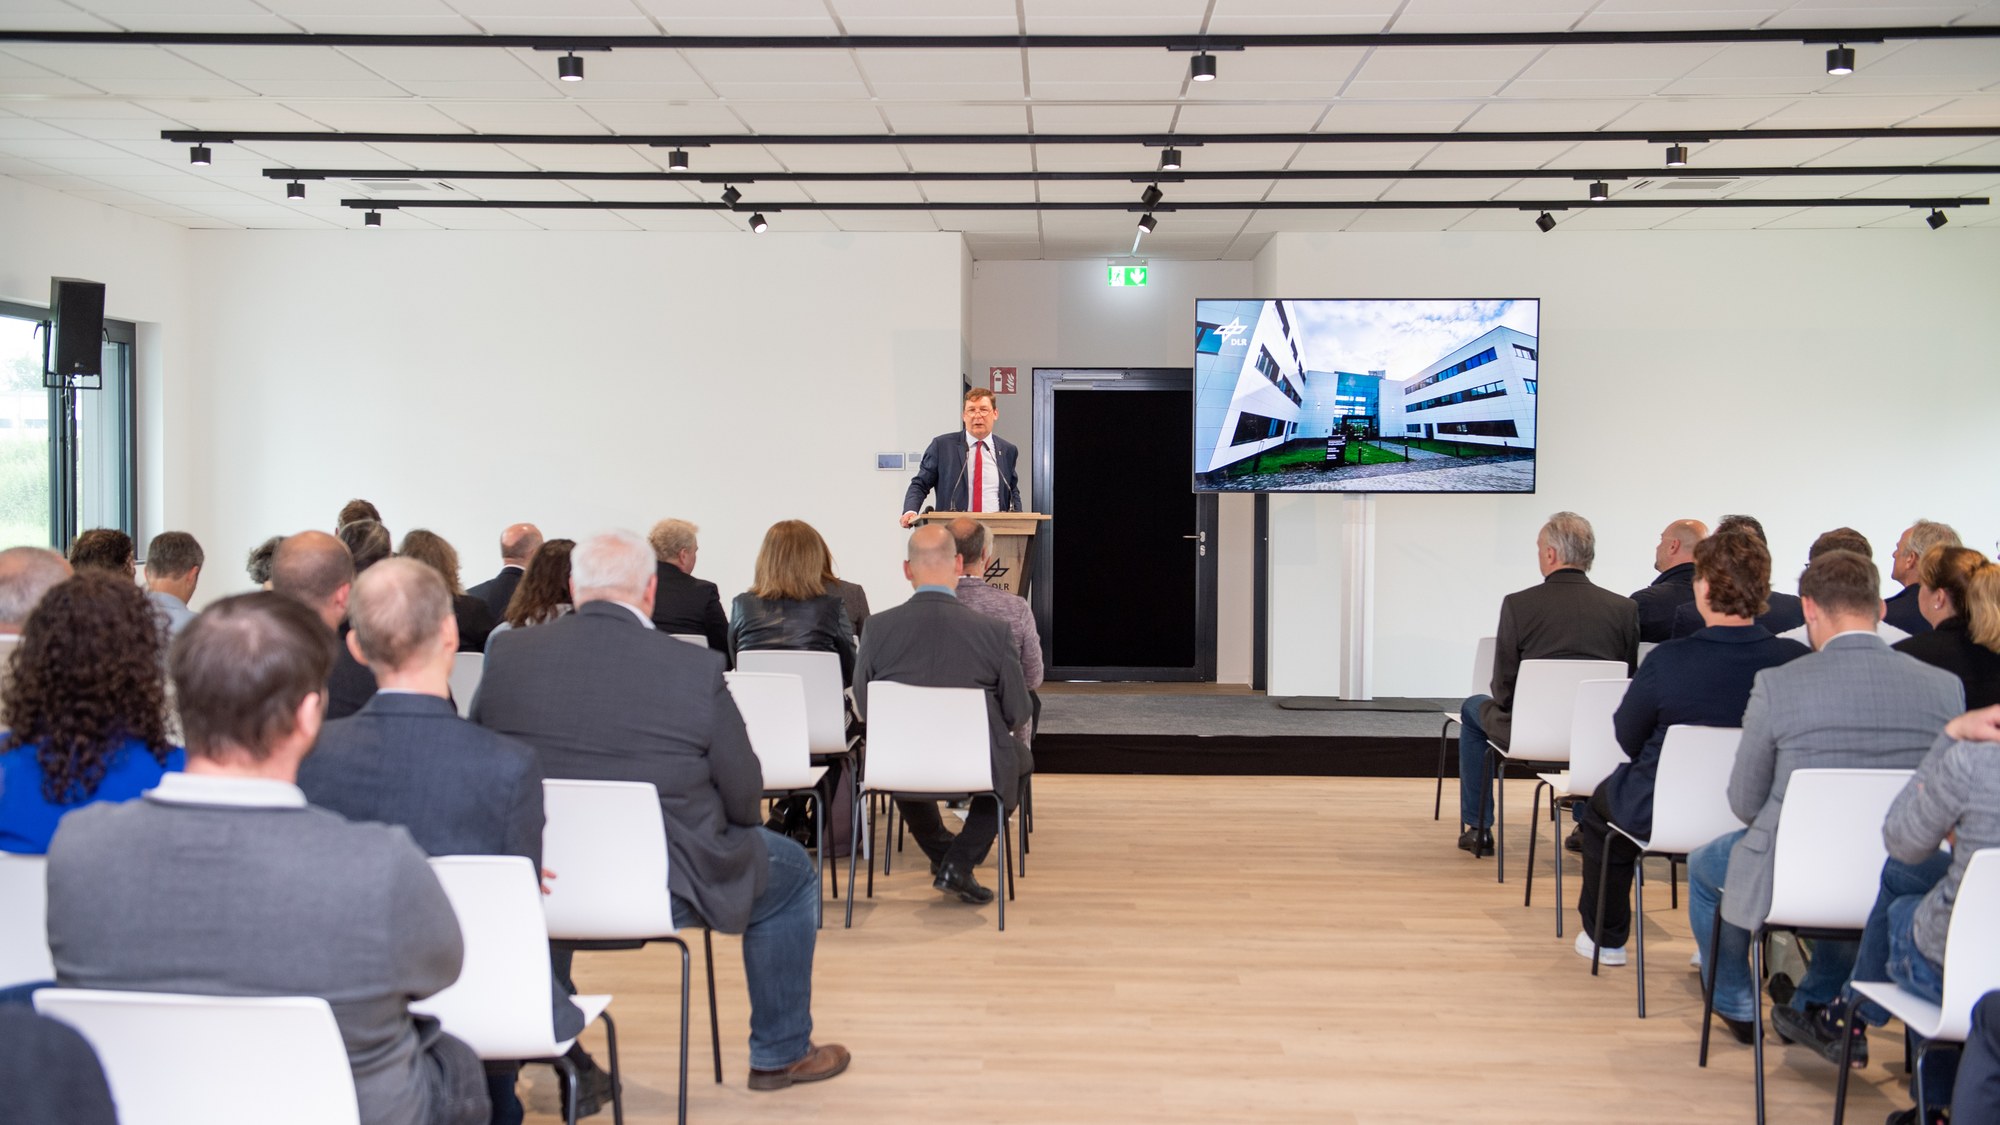 Mayor Axel Fuchs welcomed the guests at the inauguration of the new institute premises in Jülich